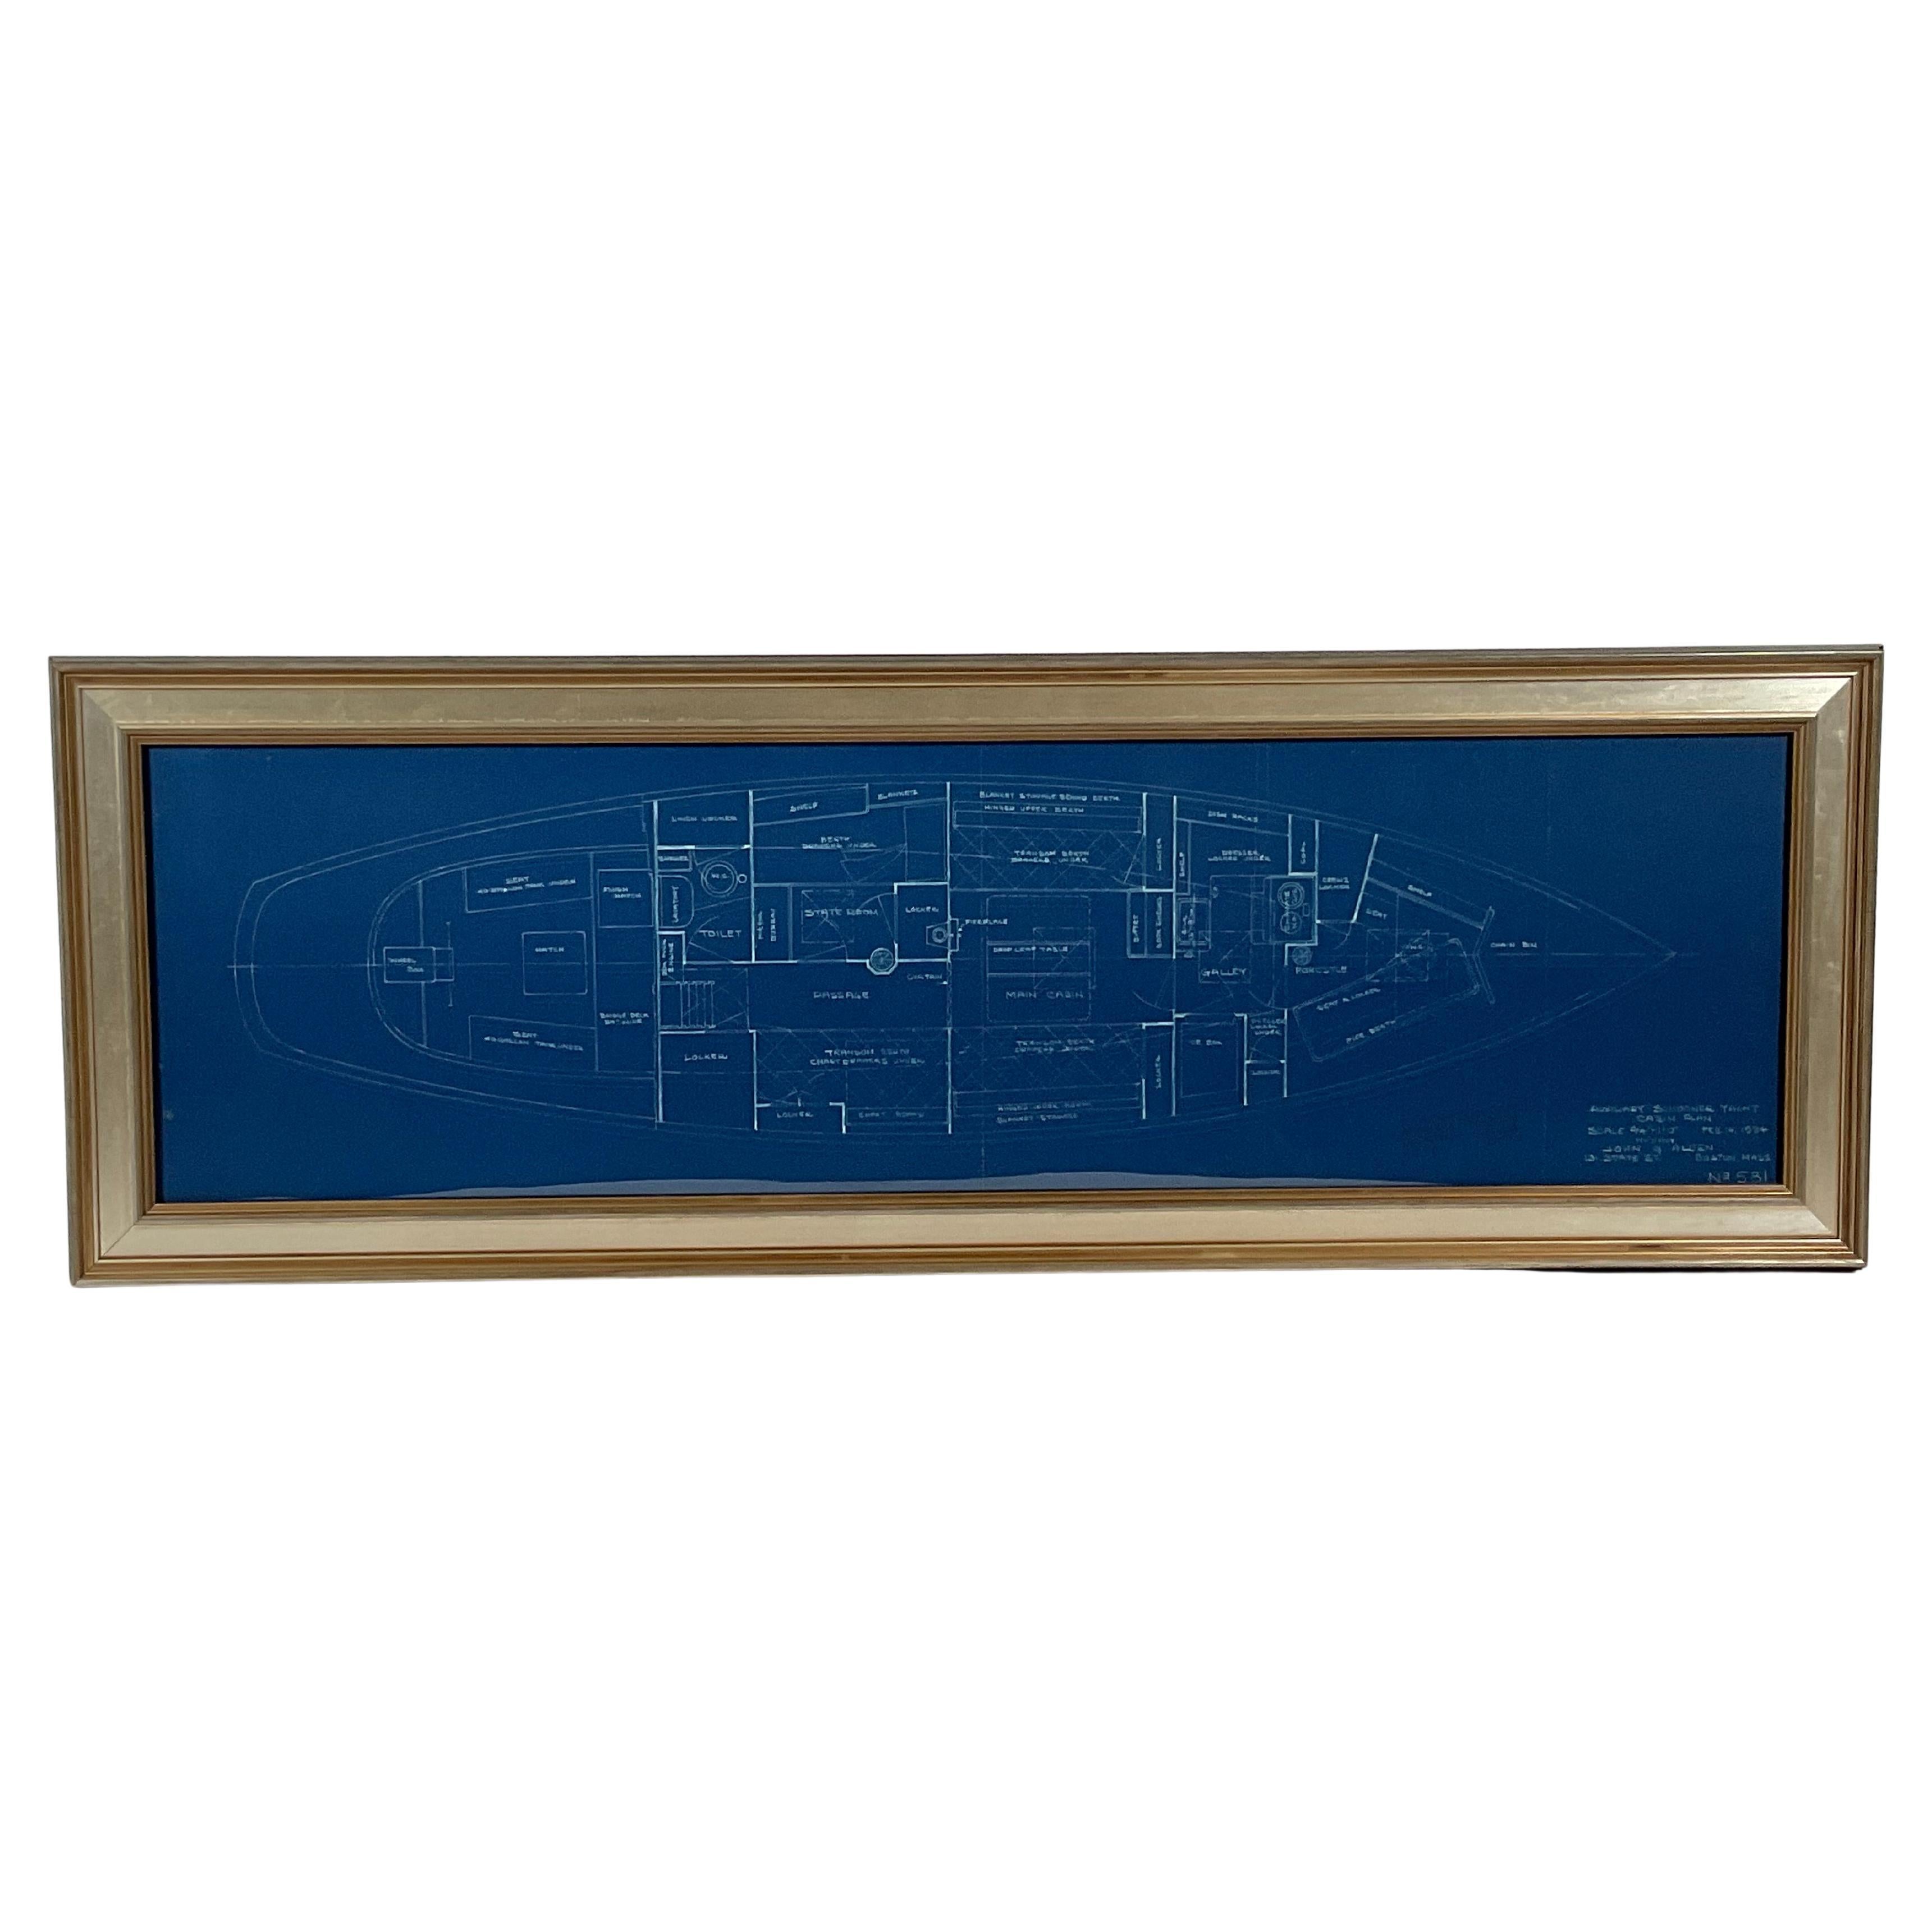 Cabin Plan Blueprint of the Yacht “Spirit” For Sale